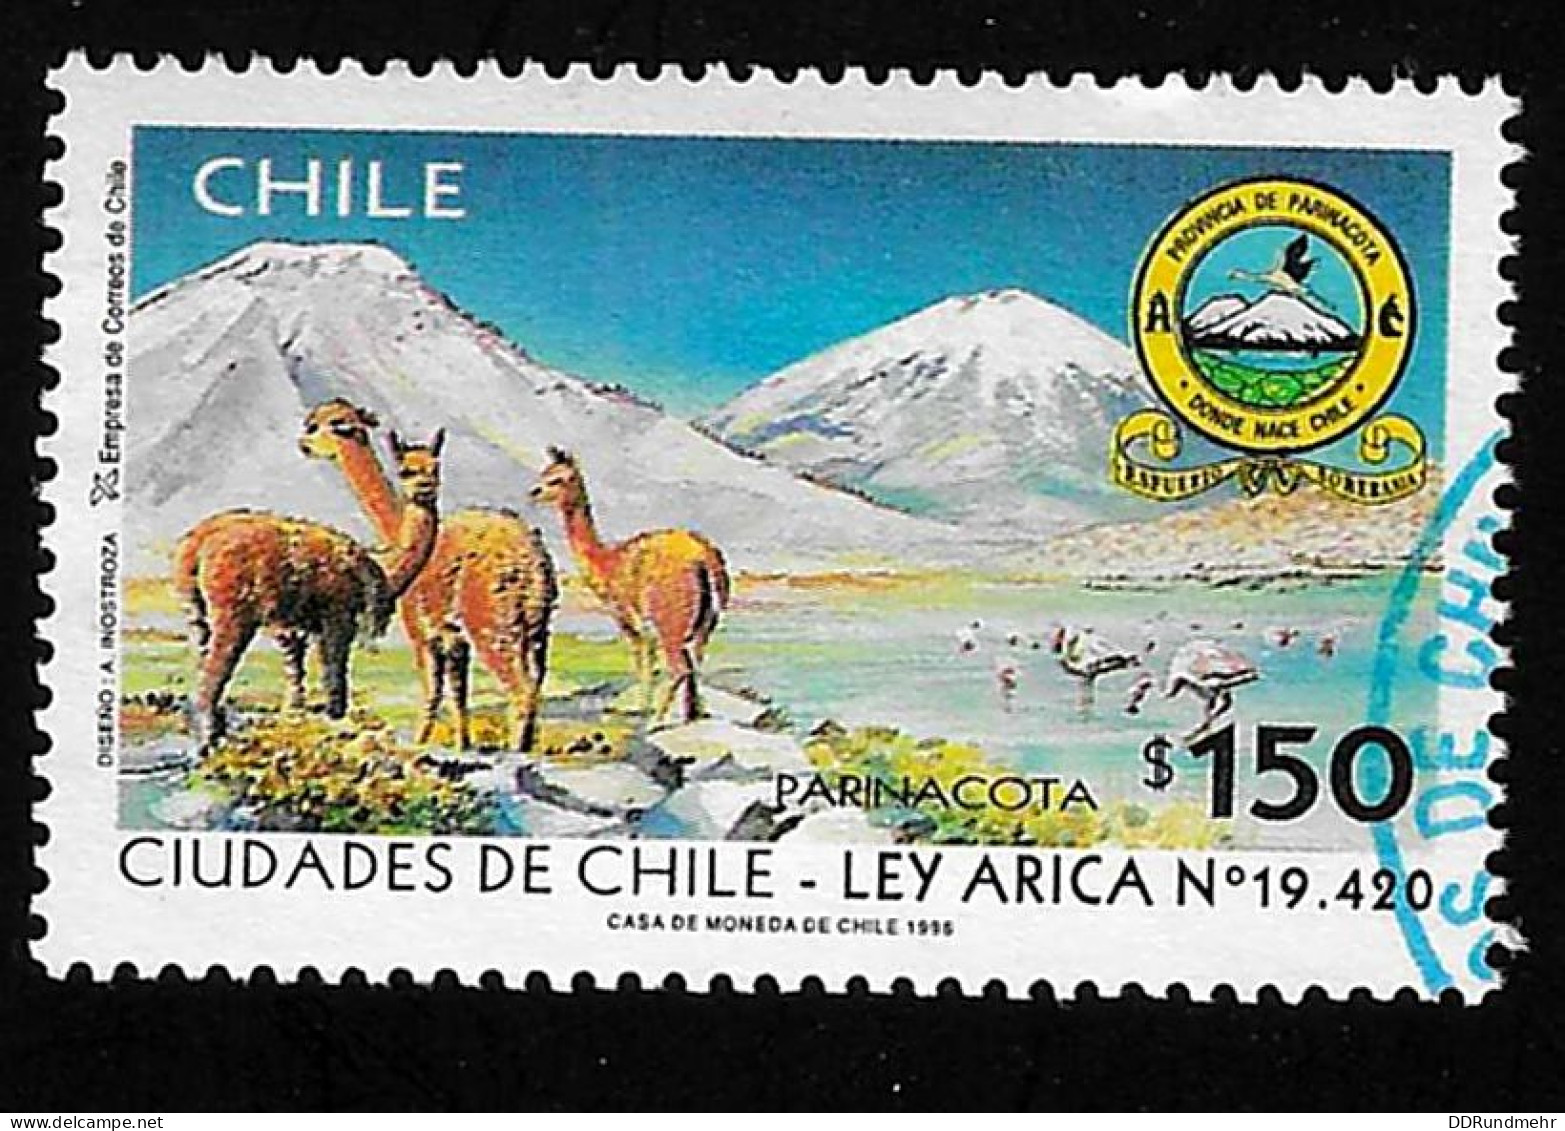 1996 Guanaco Michel CL 1803 Stamp Number CL 1191 Yvert Et Tellier CL 1405 Stanley Gibbons CL 1760 Used - Chile